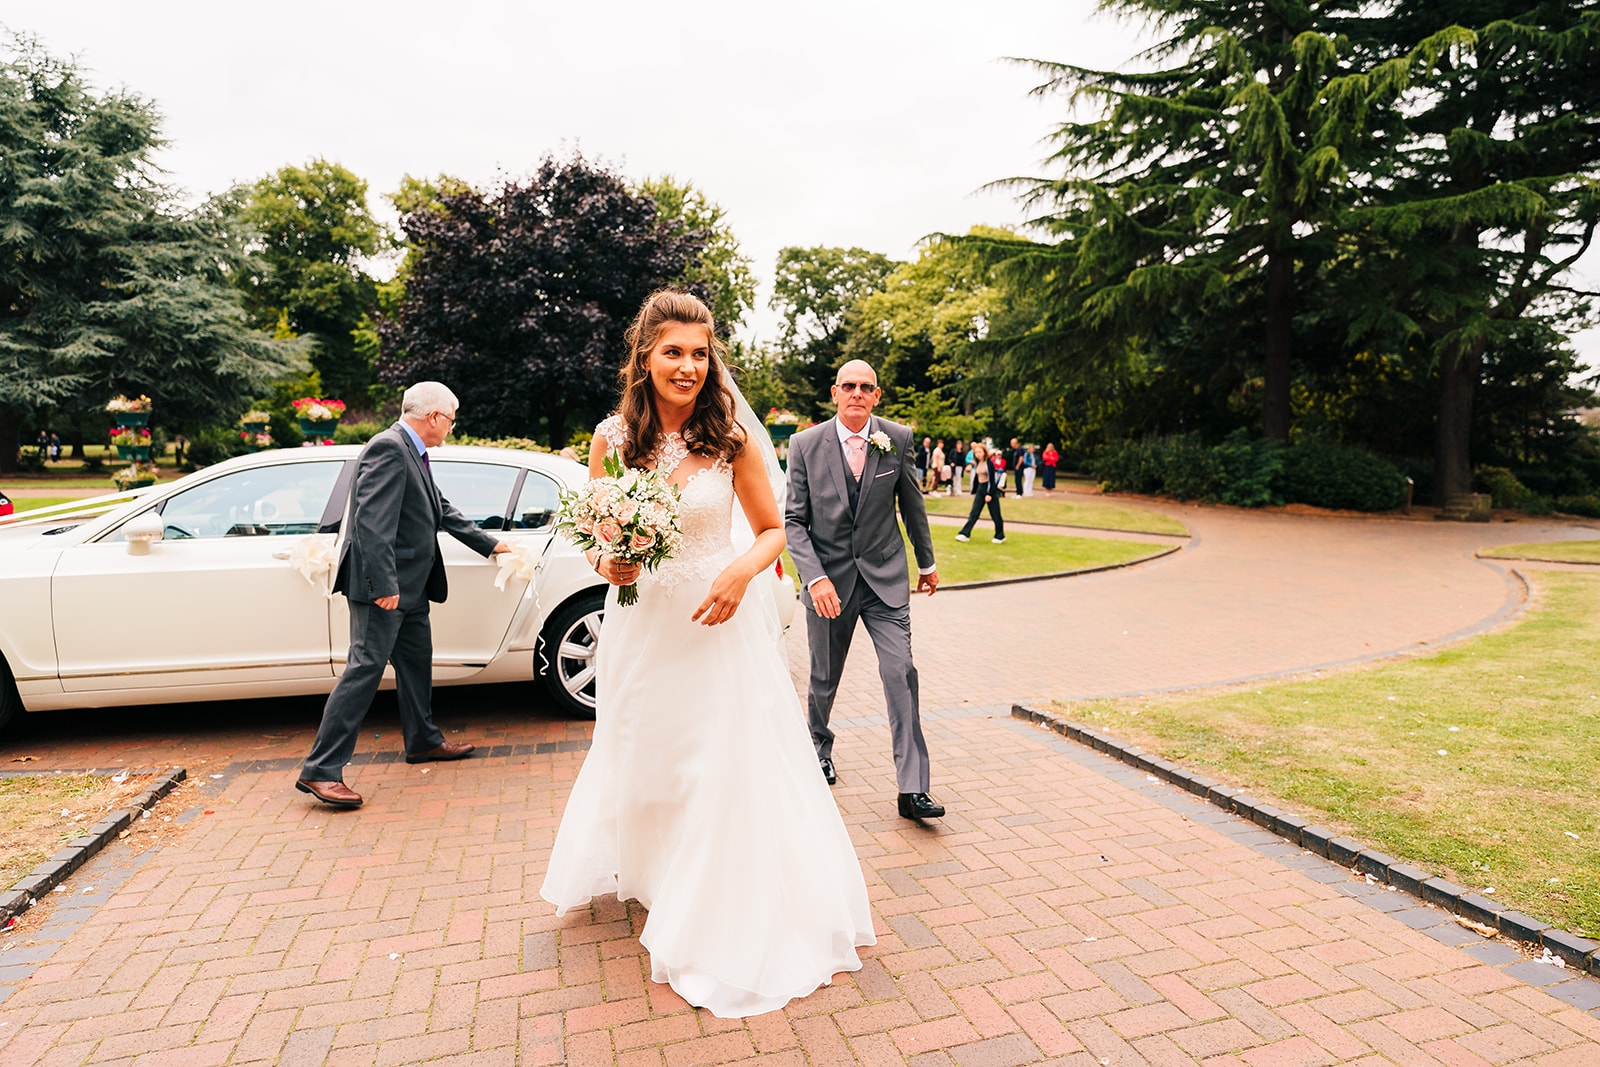 The Brewhouse & Kitchen Wedding Photography - the bride arriving at the registry office for the wedding